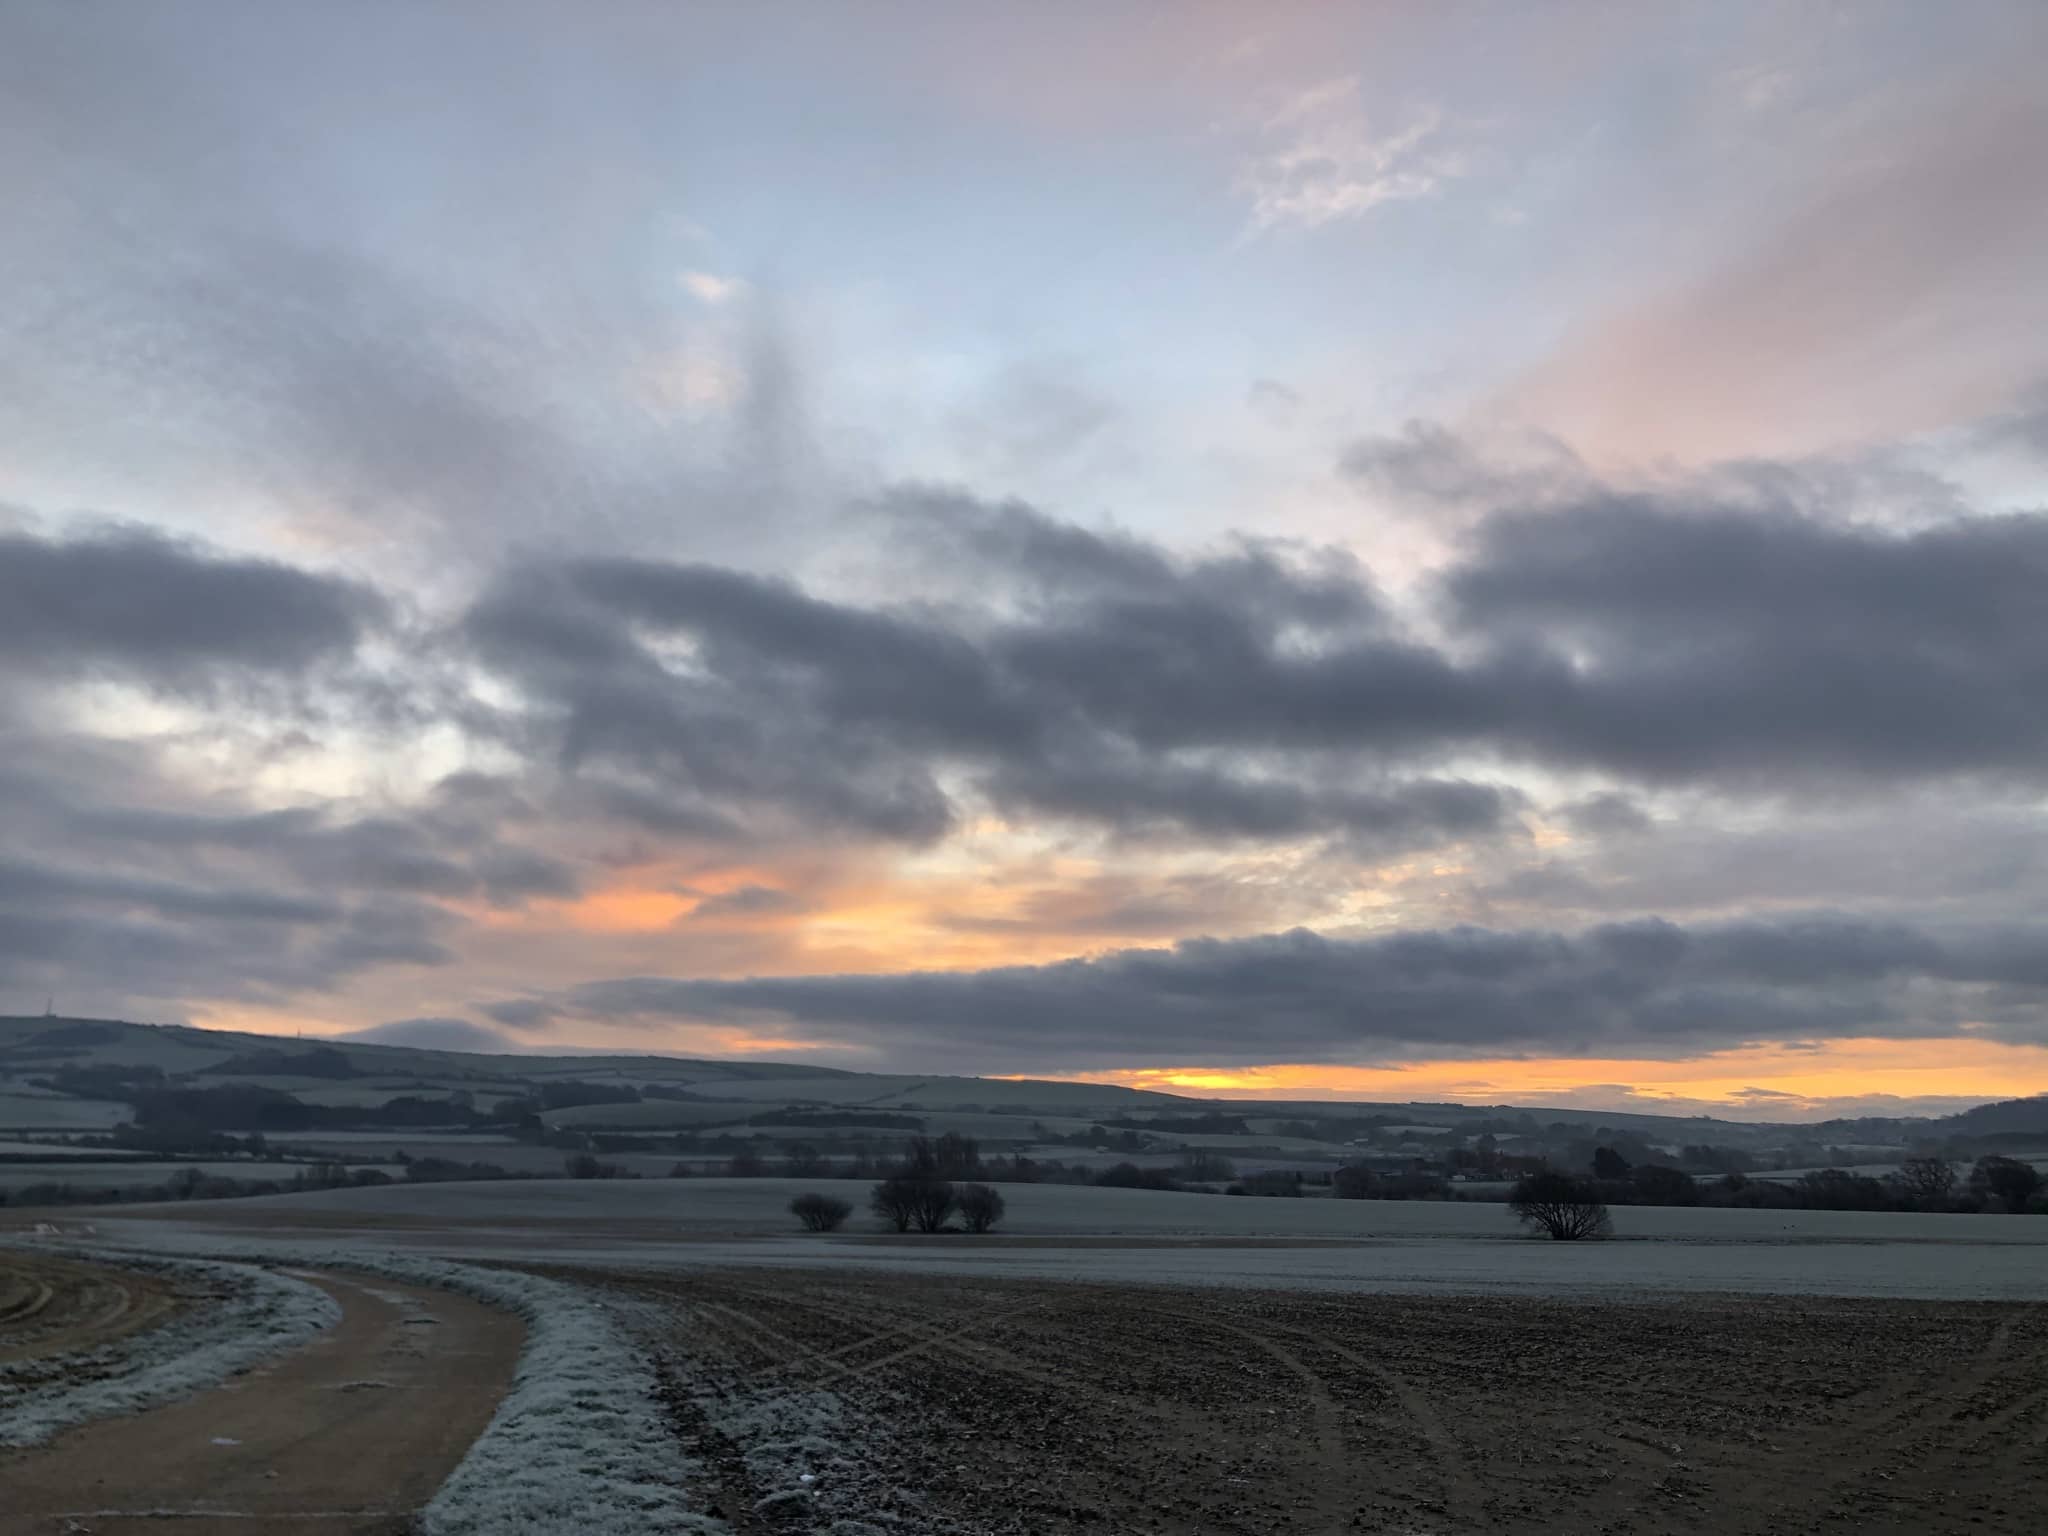 looking across the frosty farmland to the sunrise